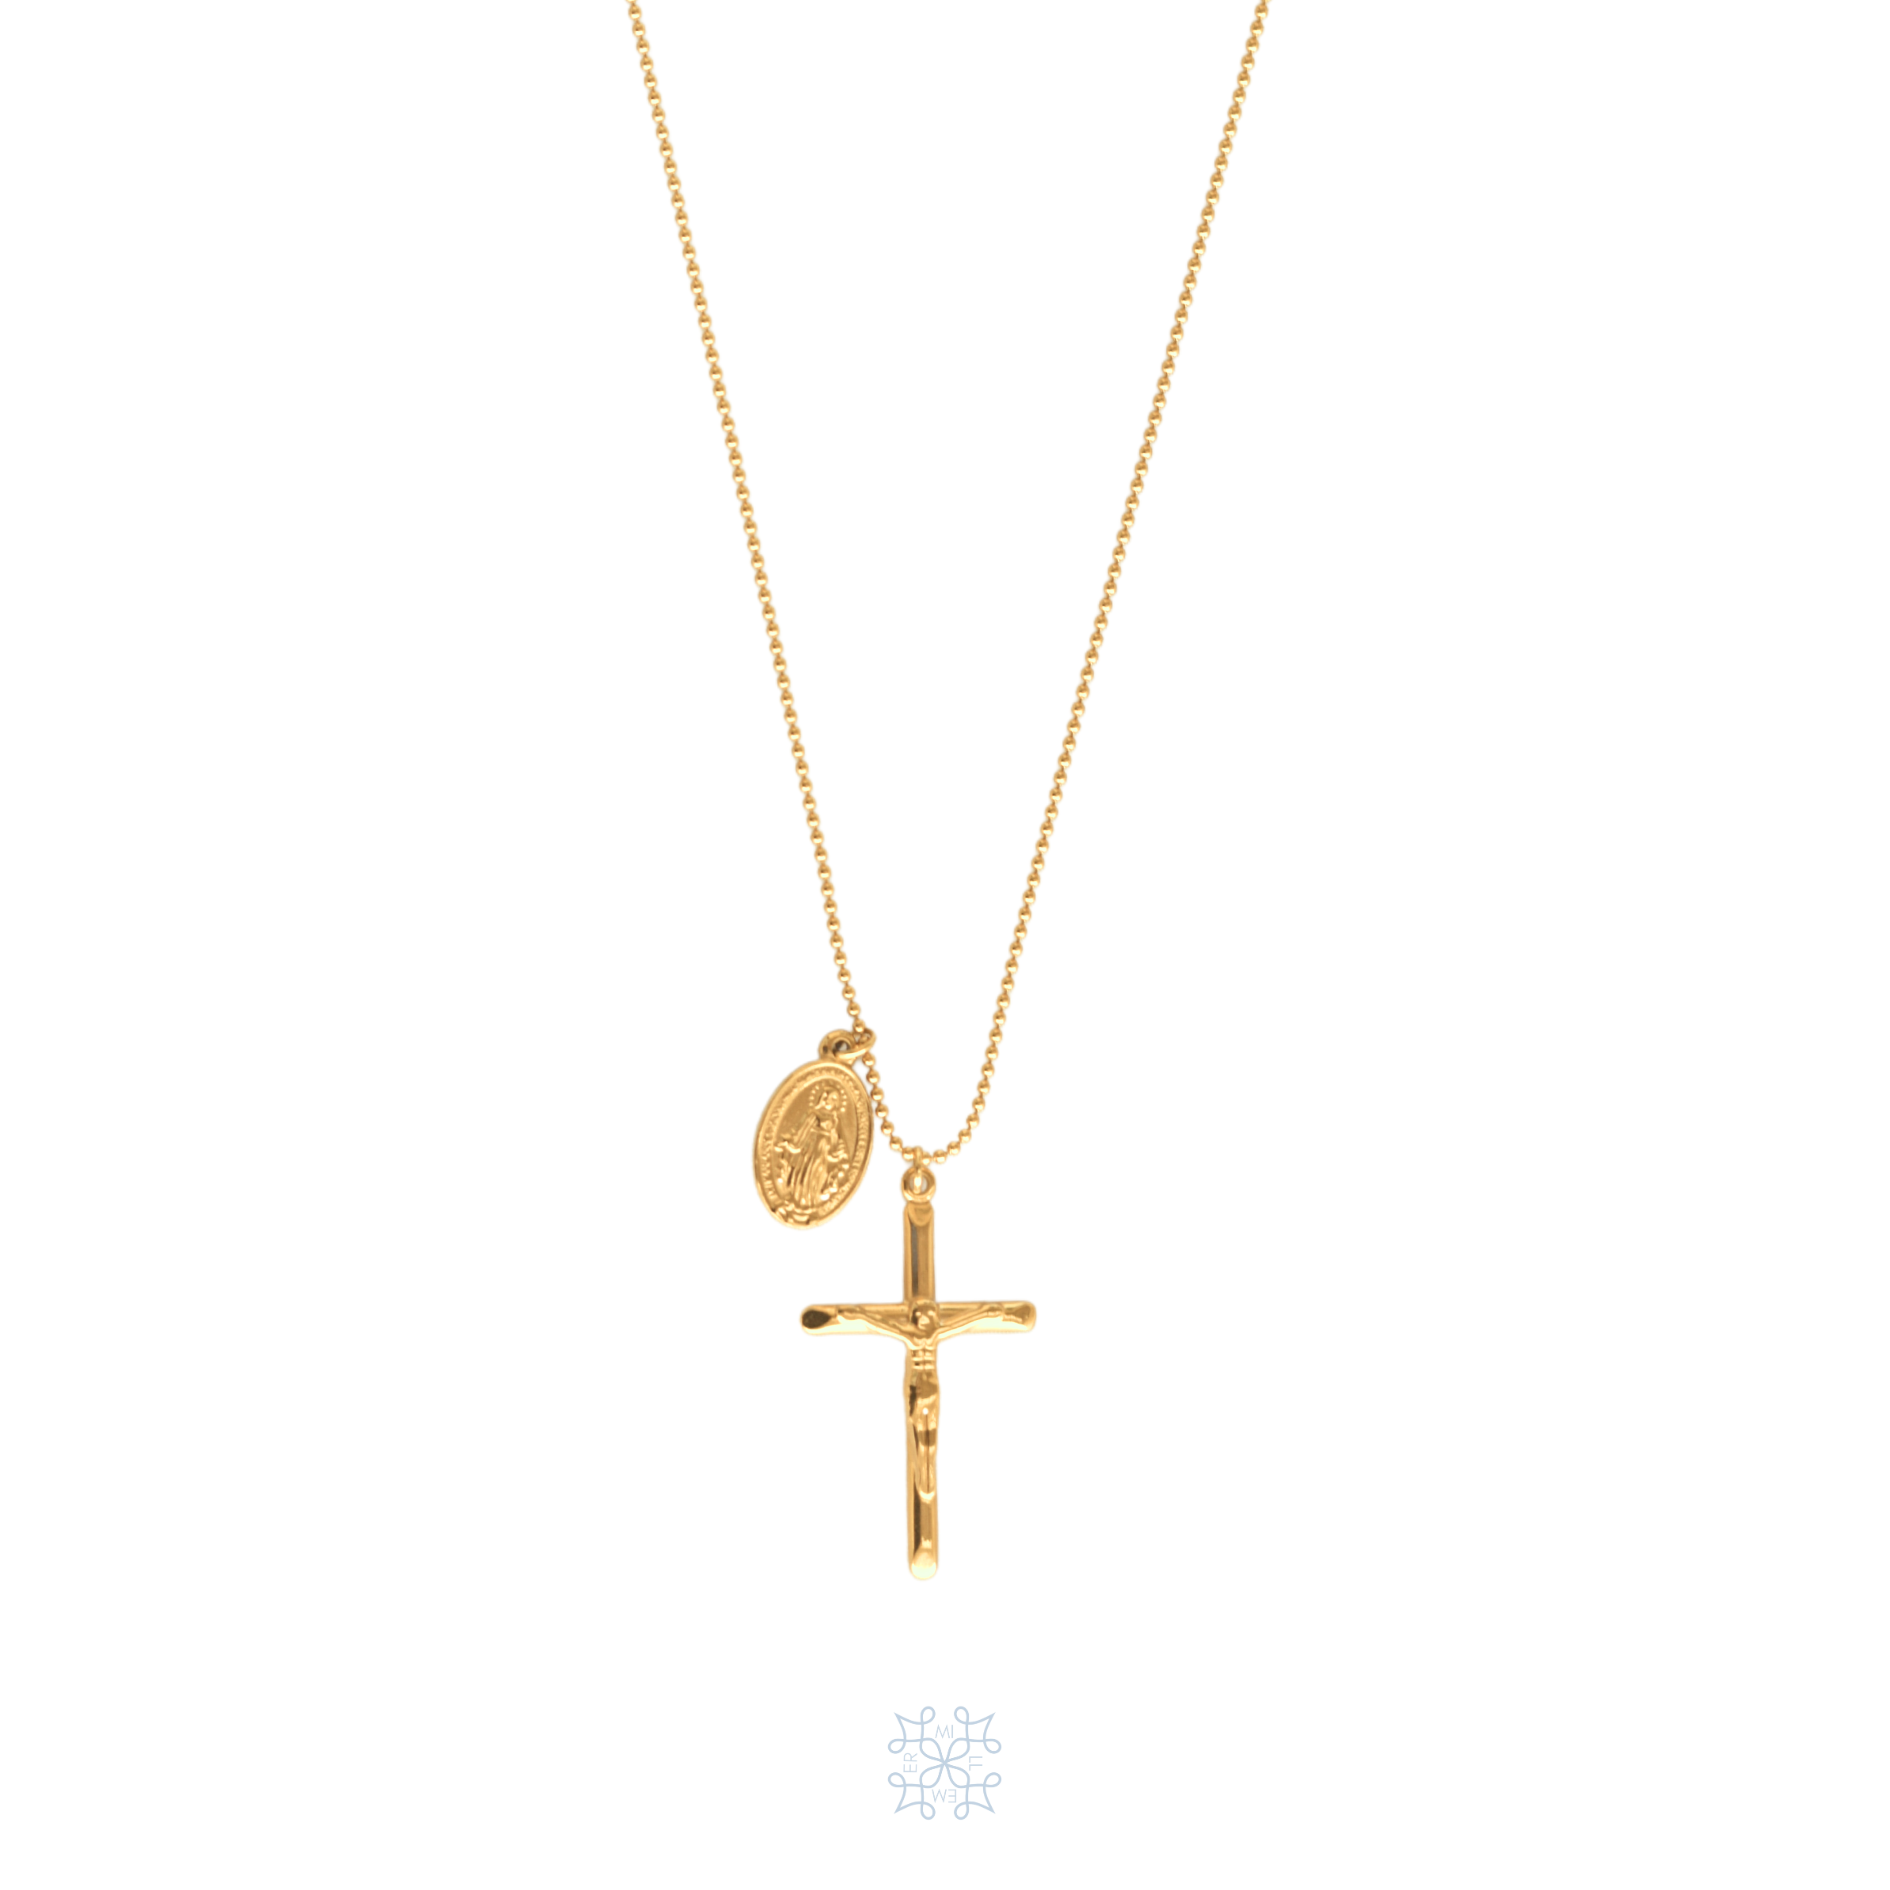 Gold cross pendant necklace. Cross pendant with jesus crist in the crucifix. Oval shape small drop on the side with mother mary on top of it.